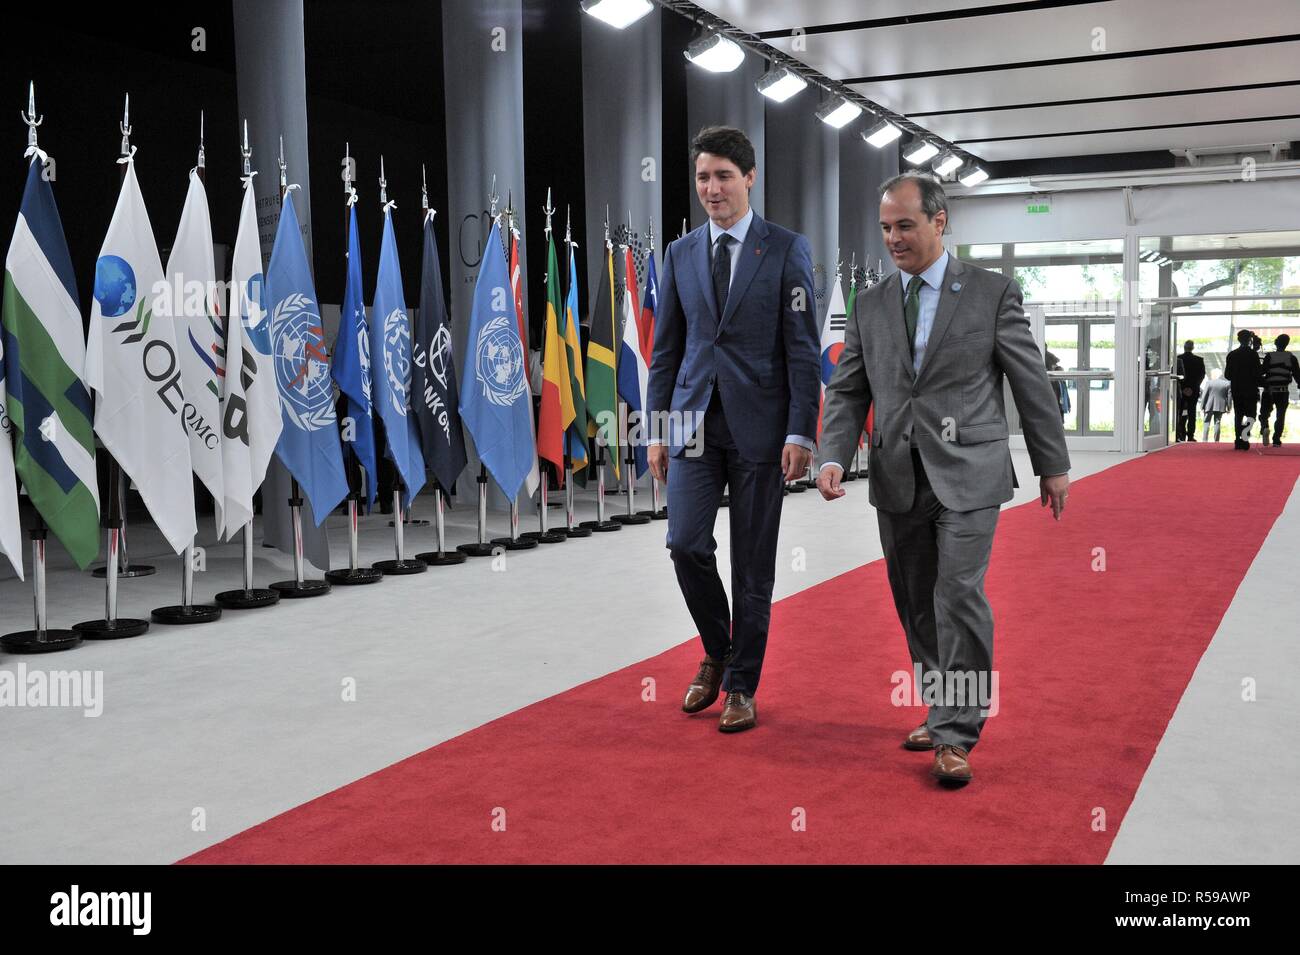 Buenos Aires, Argentina. 30th Nov, 2018. Canadian Prime Minister Justin Trudeau, left, arrives for the start of the G20 Summit meeting at the Costa Salguero Center November 30, 2018 in Buenos Aires, Argentina. Credit: Planetpix/Alamy Live News Stock Photo